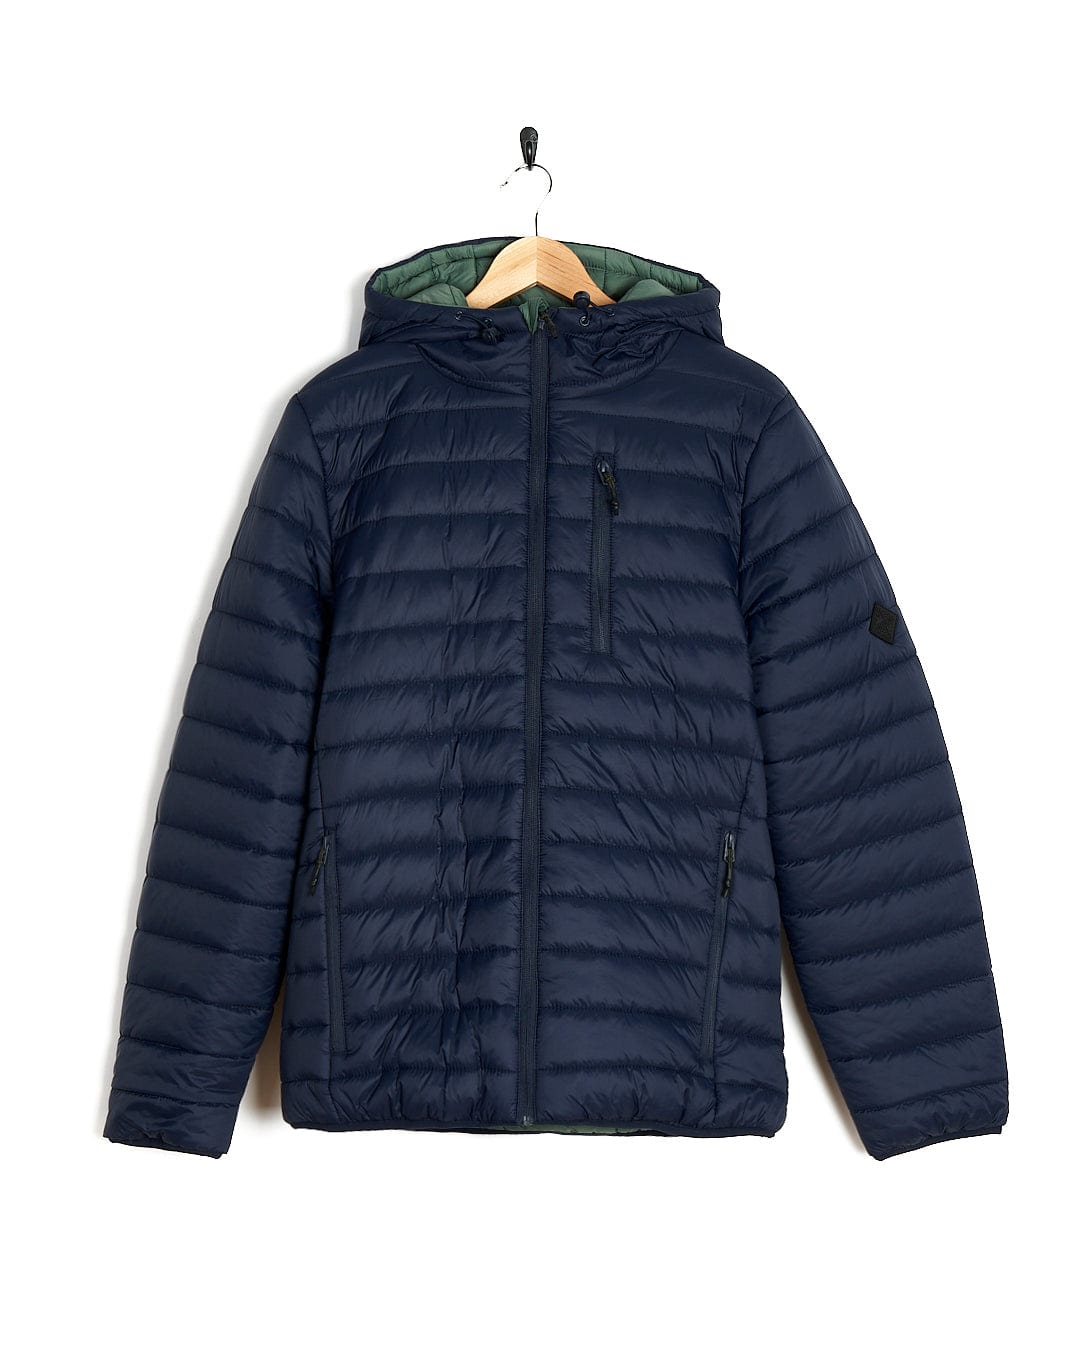 A Rusik 2 - Reversible Padded Jacket by Saltrock with zip pockets hanging on a hanger.